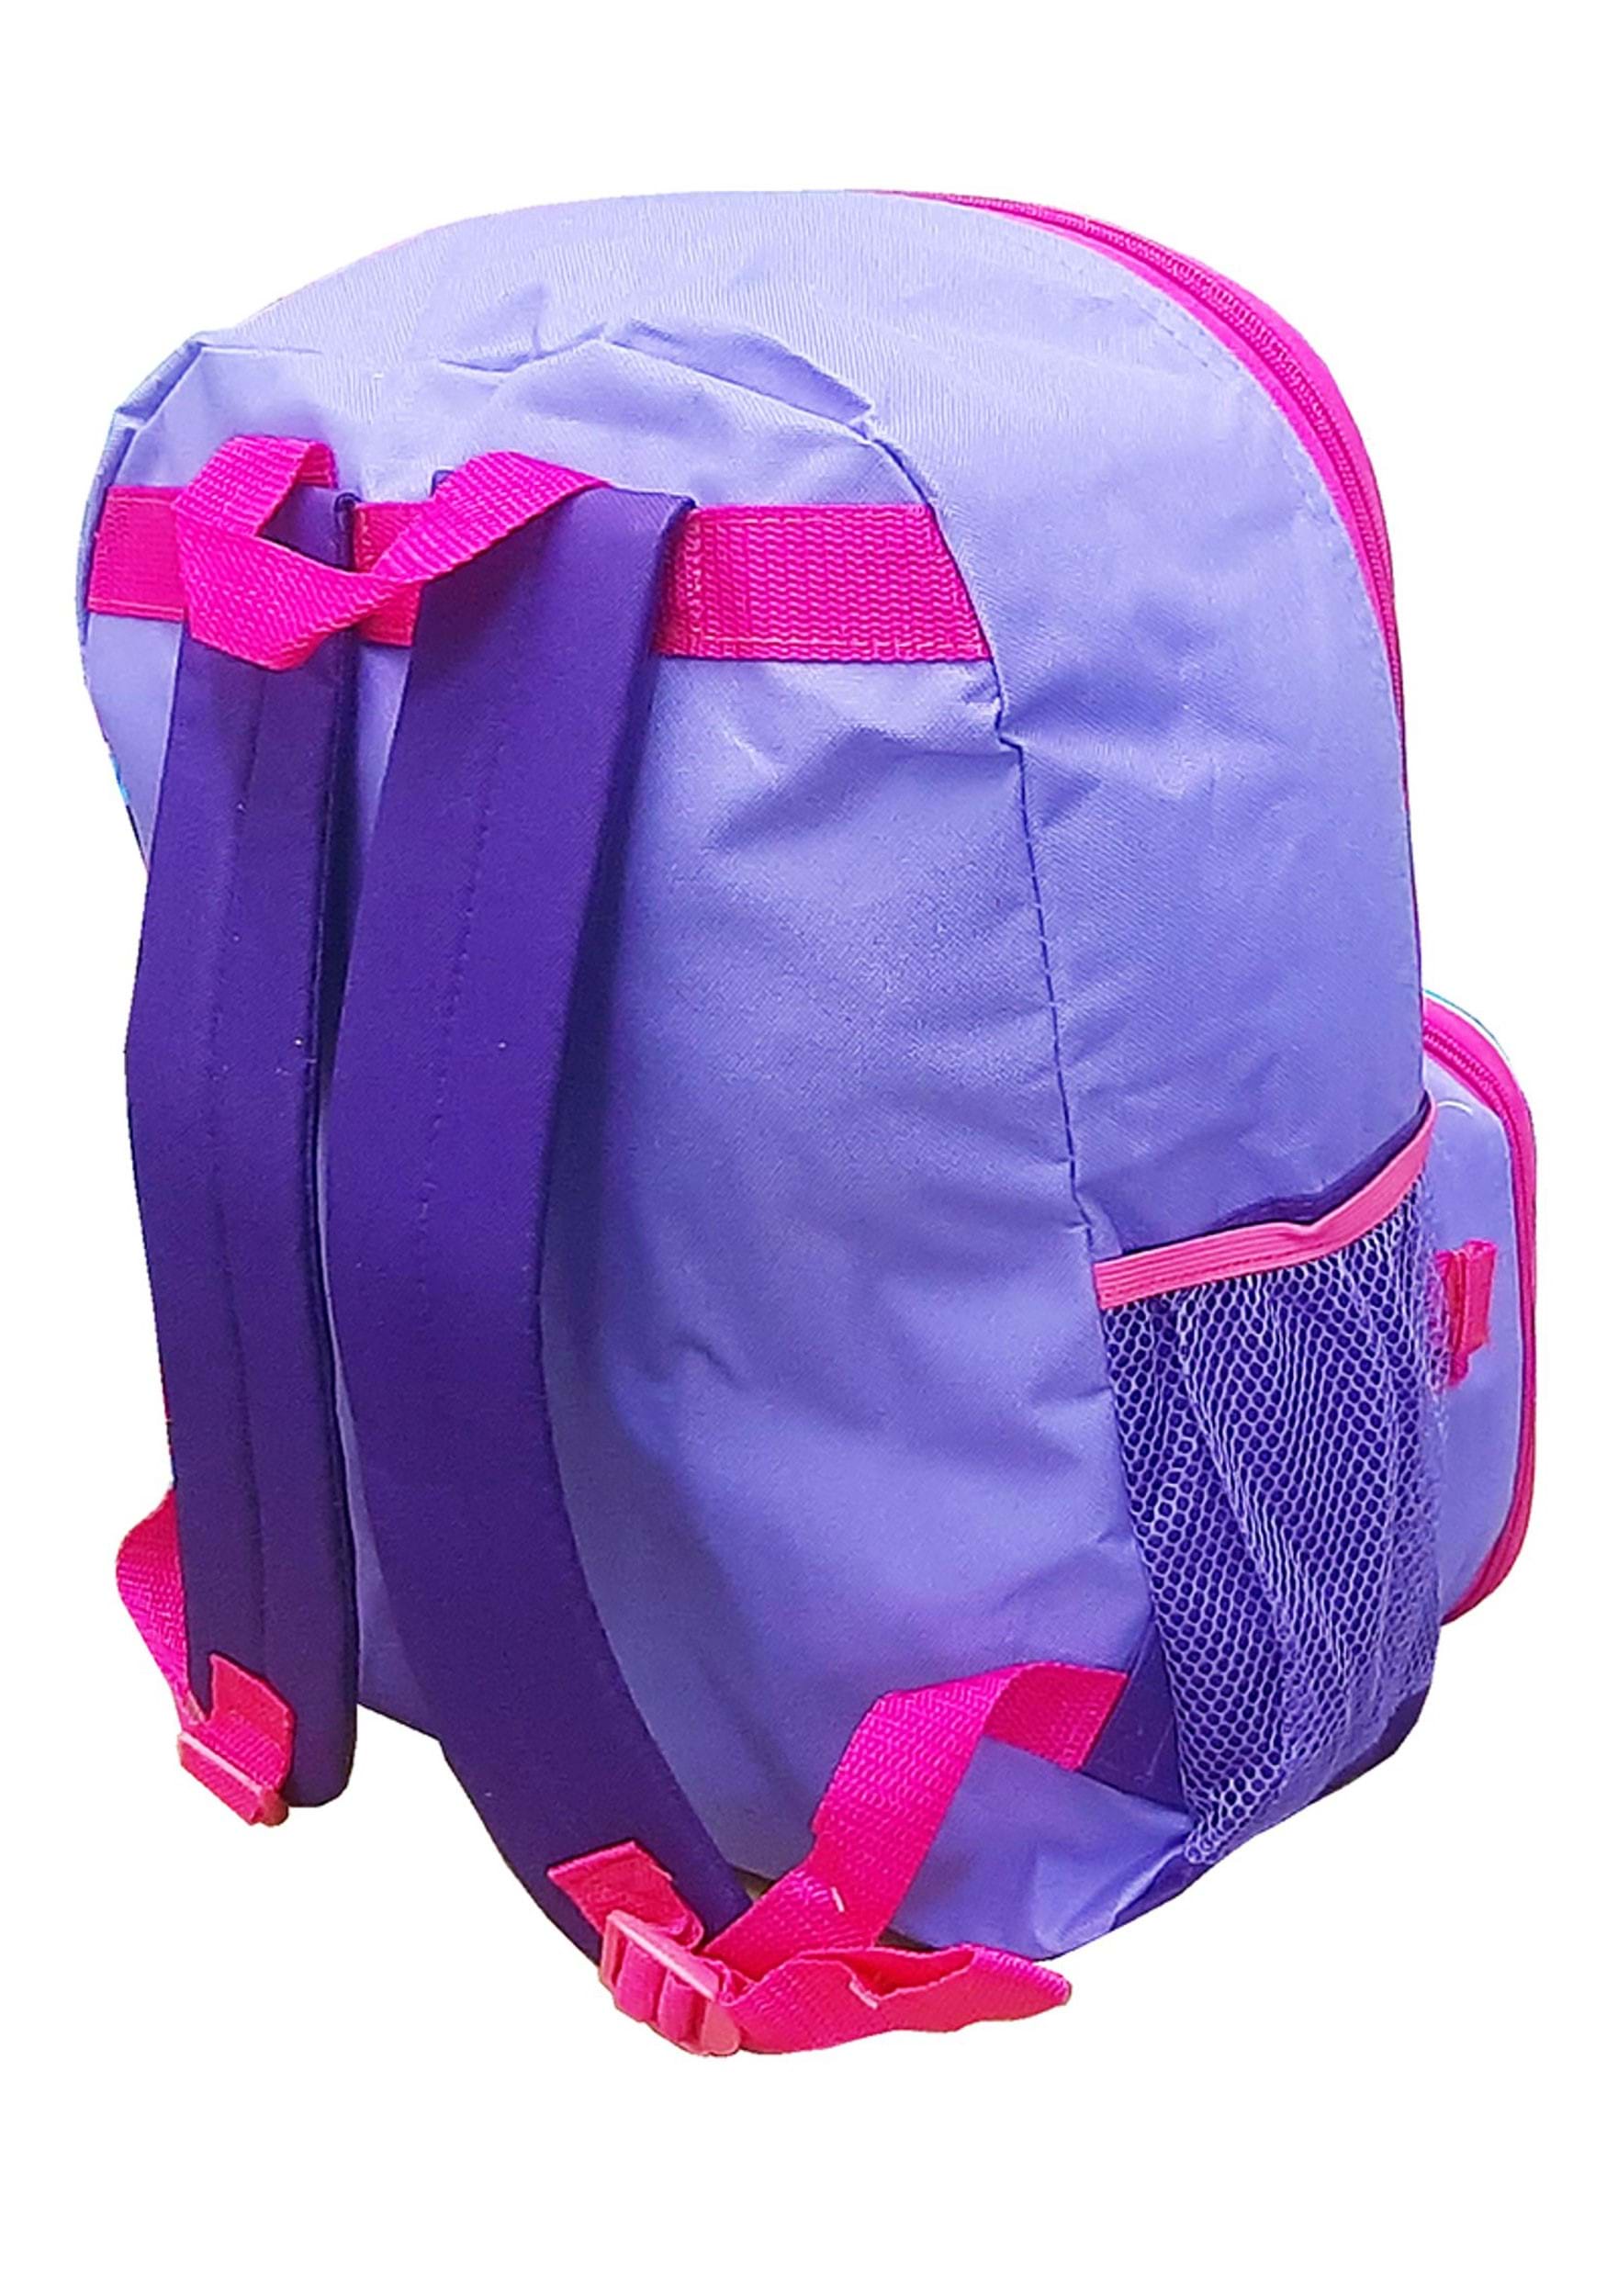 https://images.fun.com/products/82329/2-1-255844/disnsey-encanto-mirabel-16-backpack-with-lunch-kit-alt-1.jpg